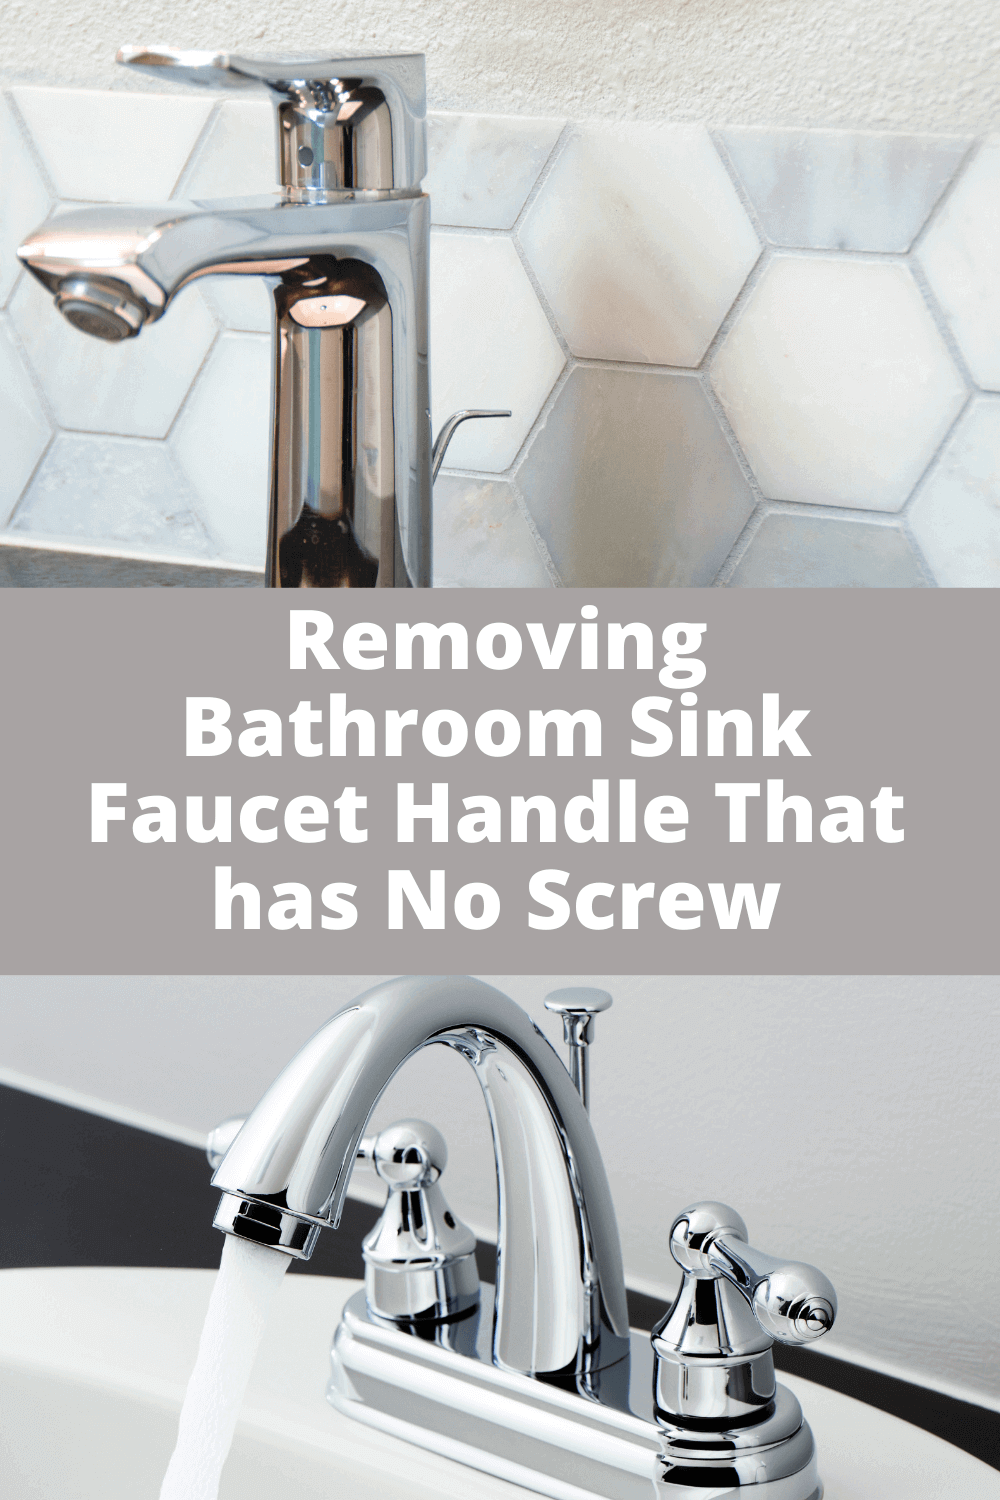 How To Remove Bathroom Sink Faucet Handle That Has No - How To Change Bathroom Sink Knobs